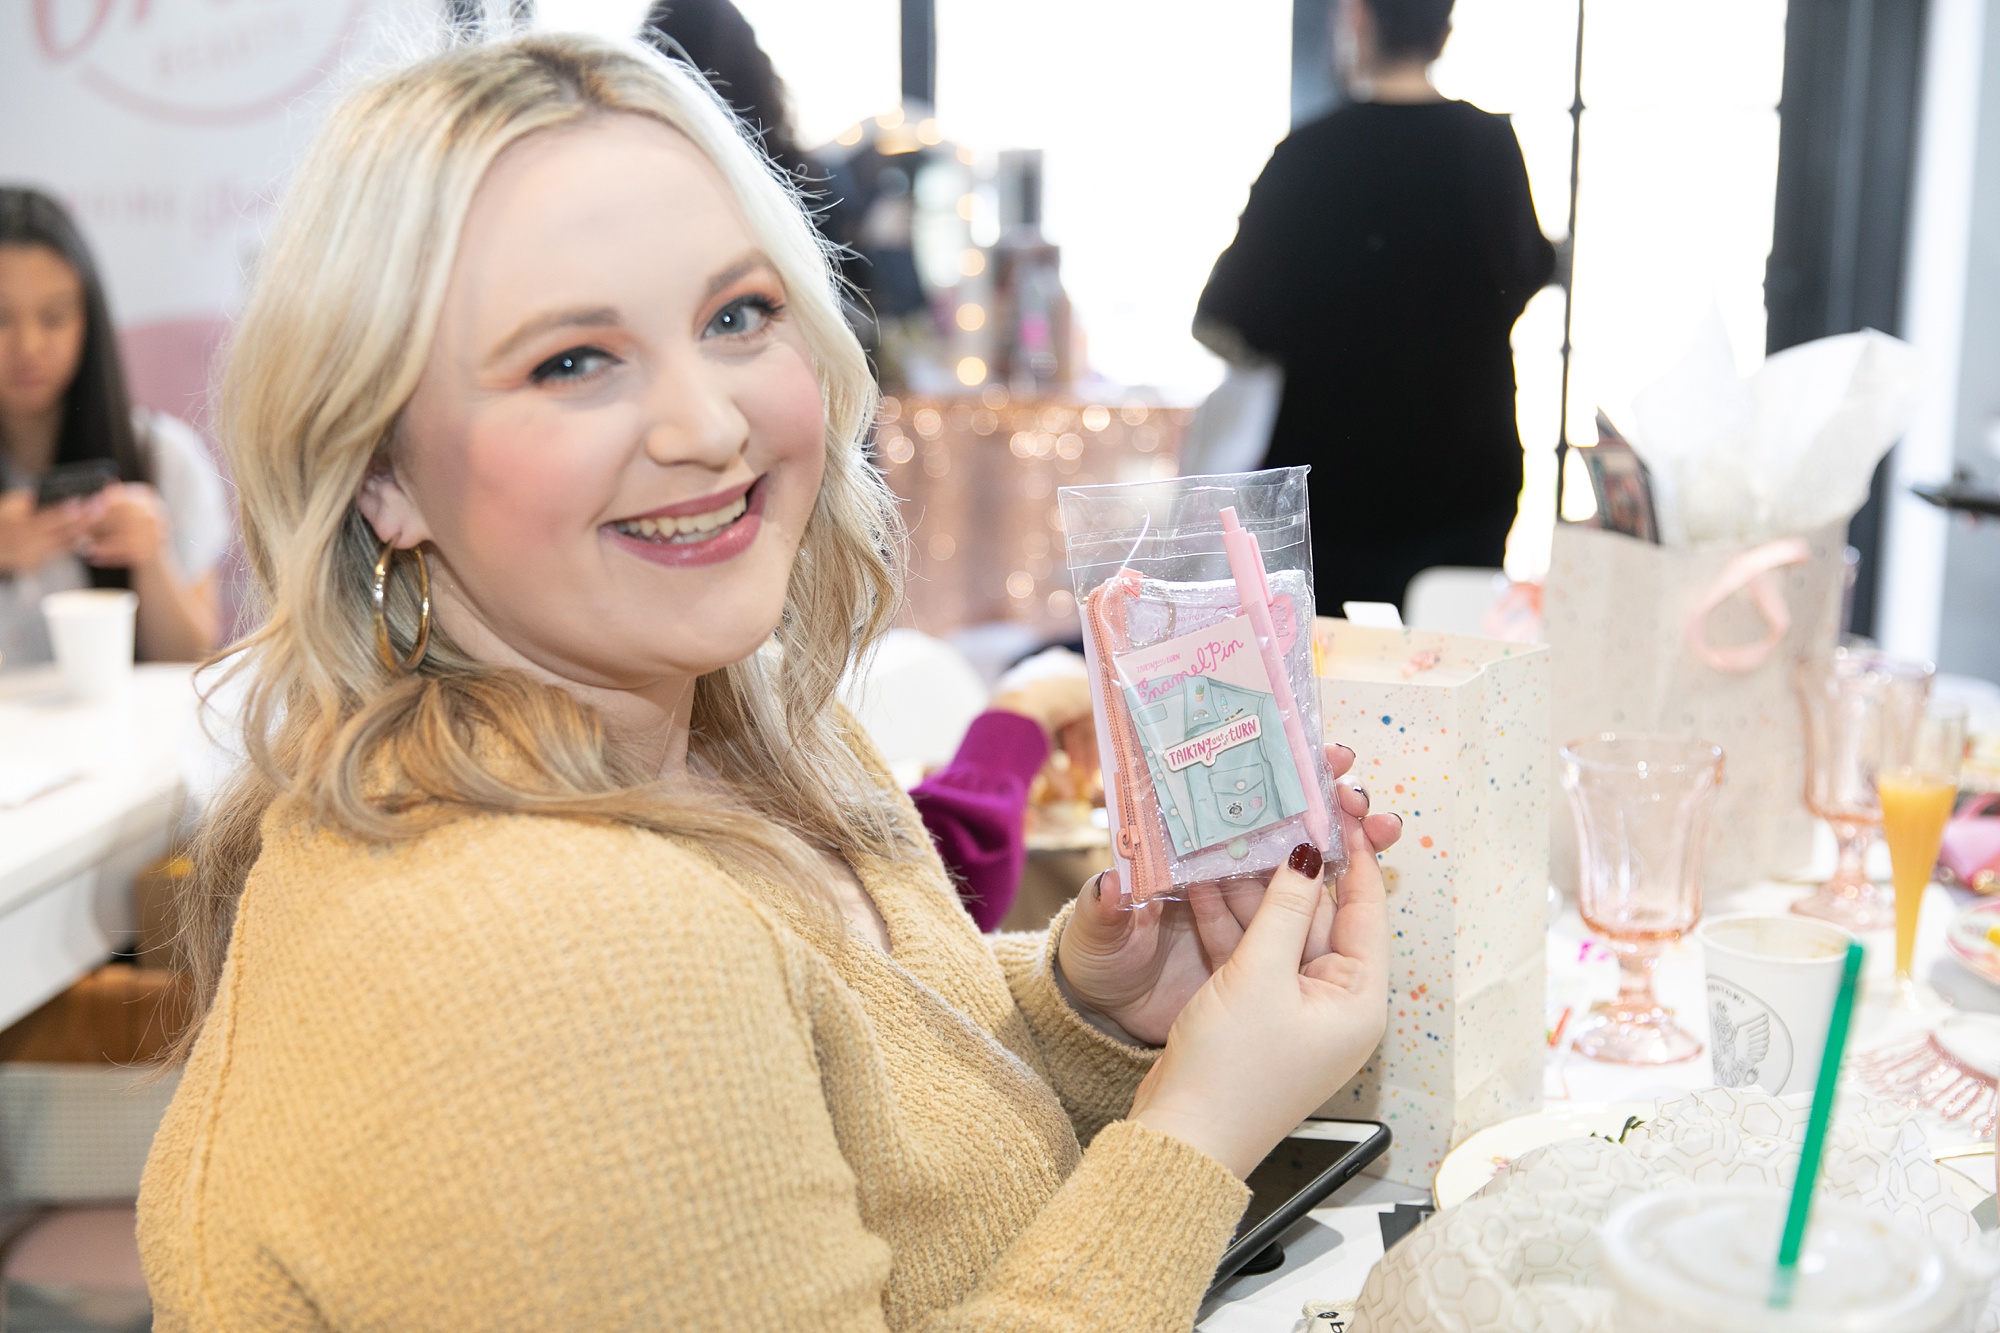 guests show off goodie bag from Galentine's Day event